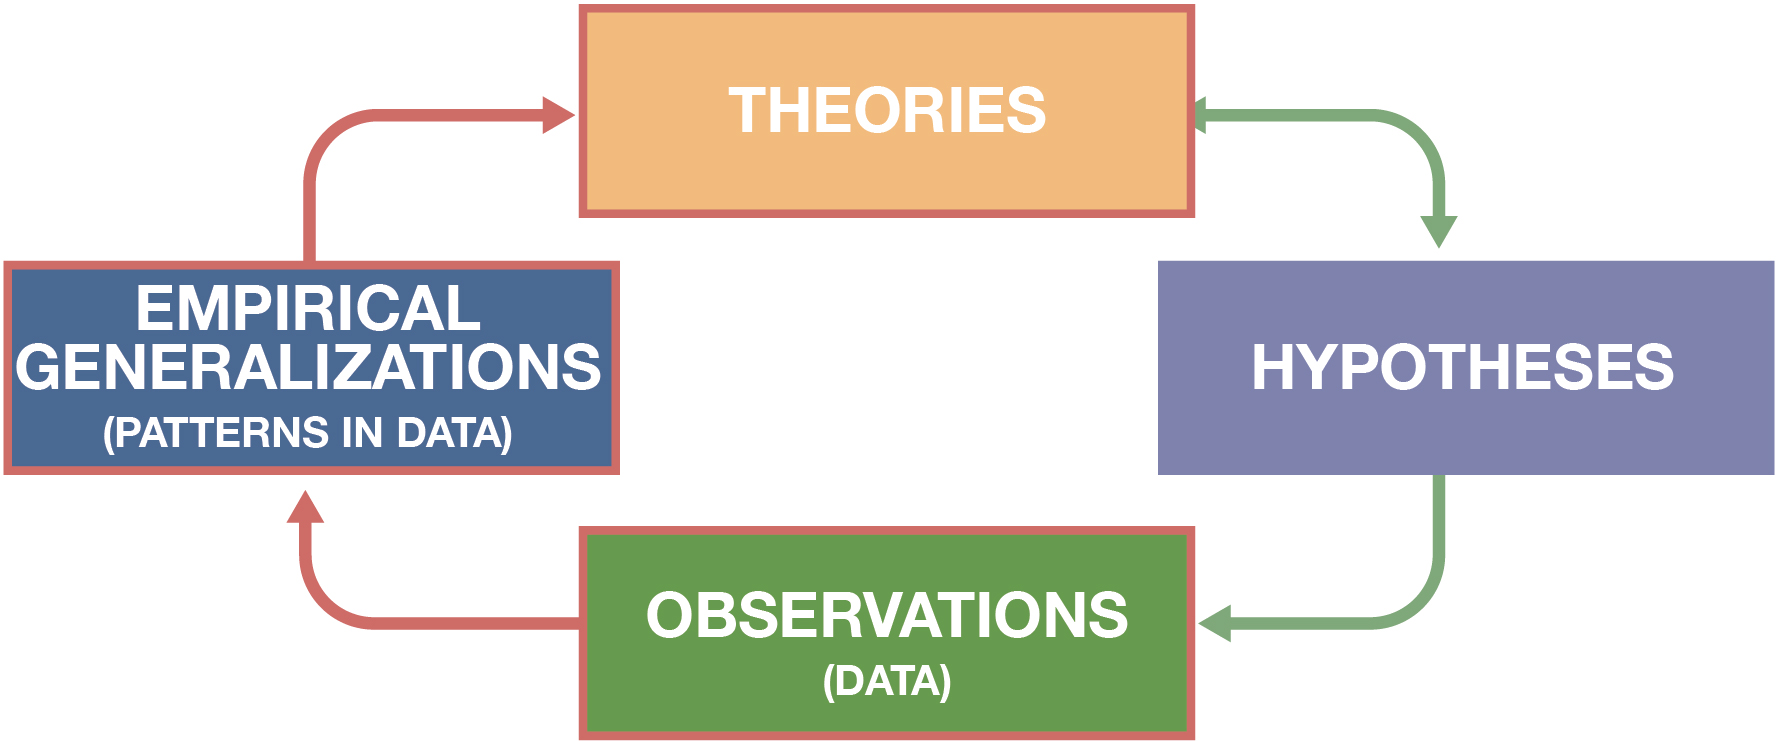 Cycle highlighting the inductive research stages of the wheel of science: (1) observations to (2) empirical generalizations to (3) theory.